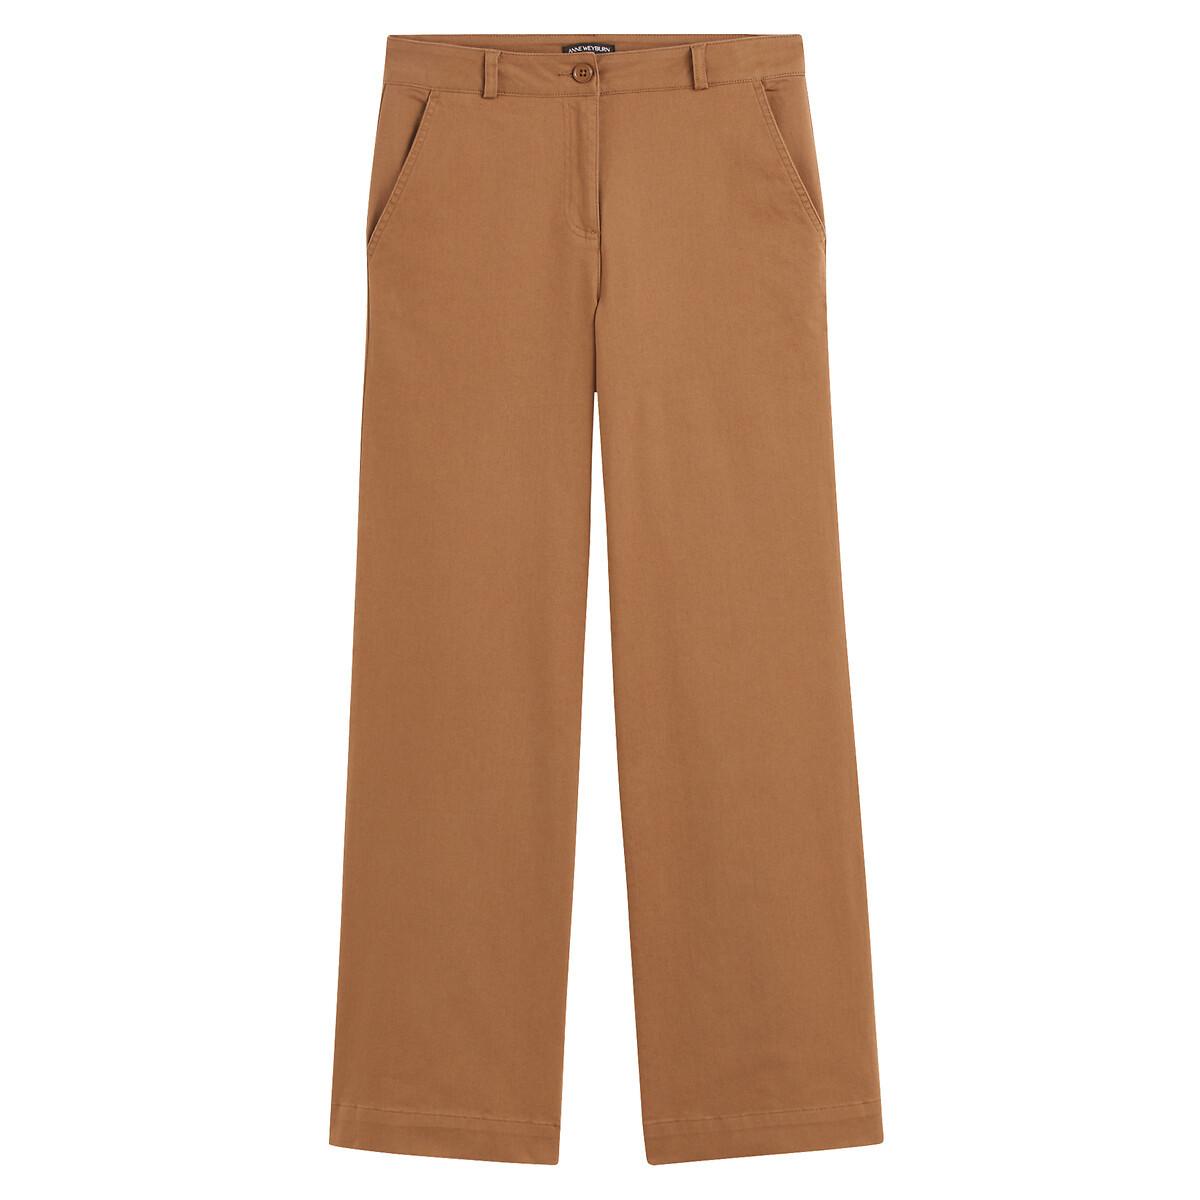 La Redoute Collections  Weite Chino-Hose 